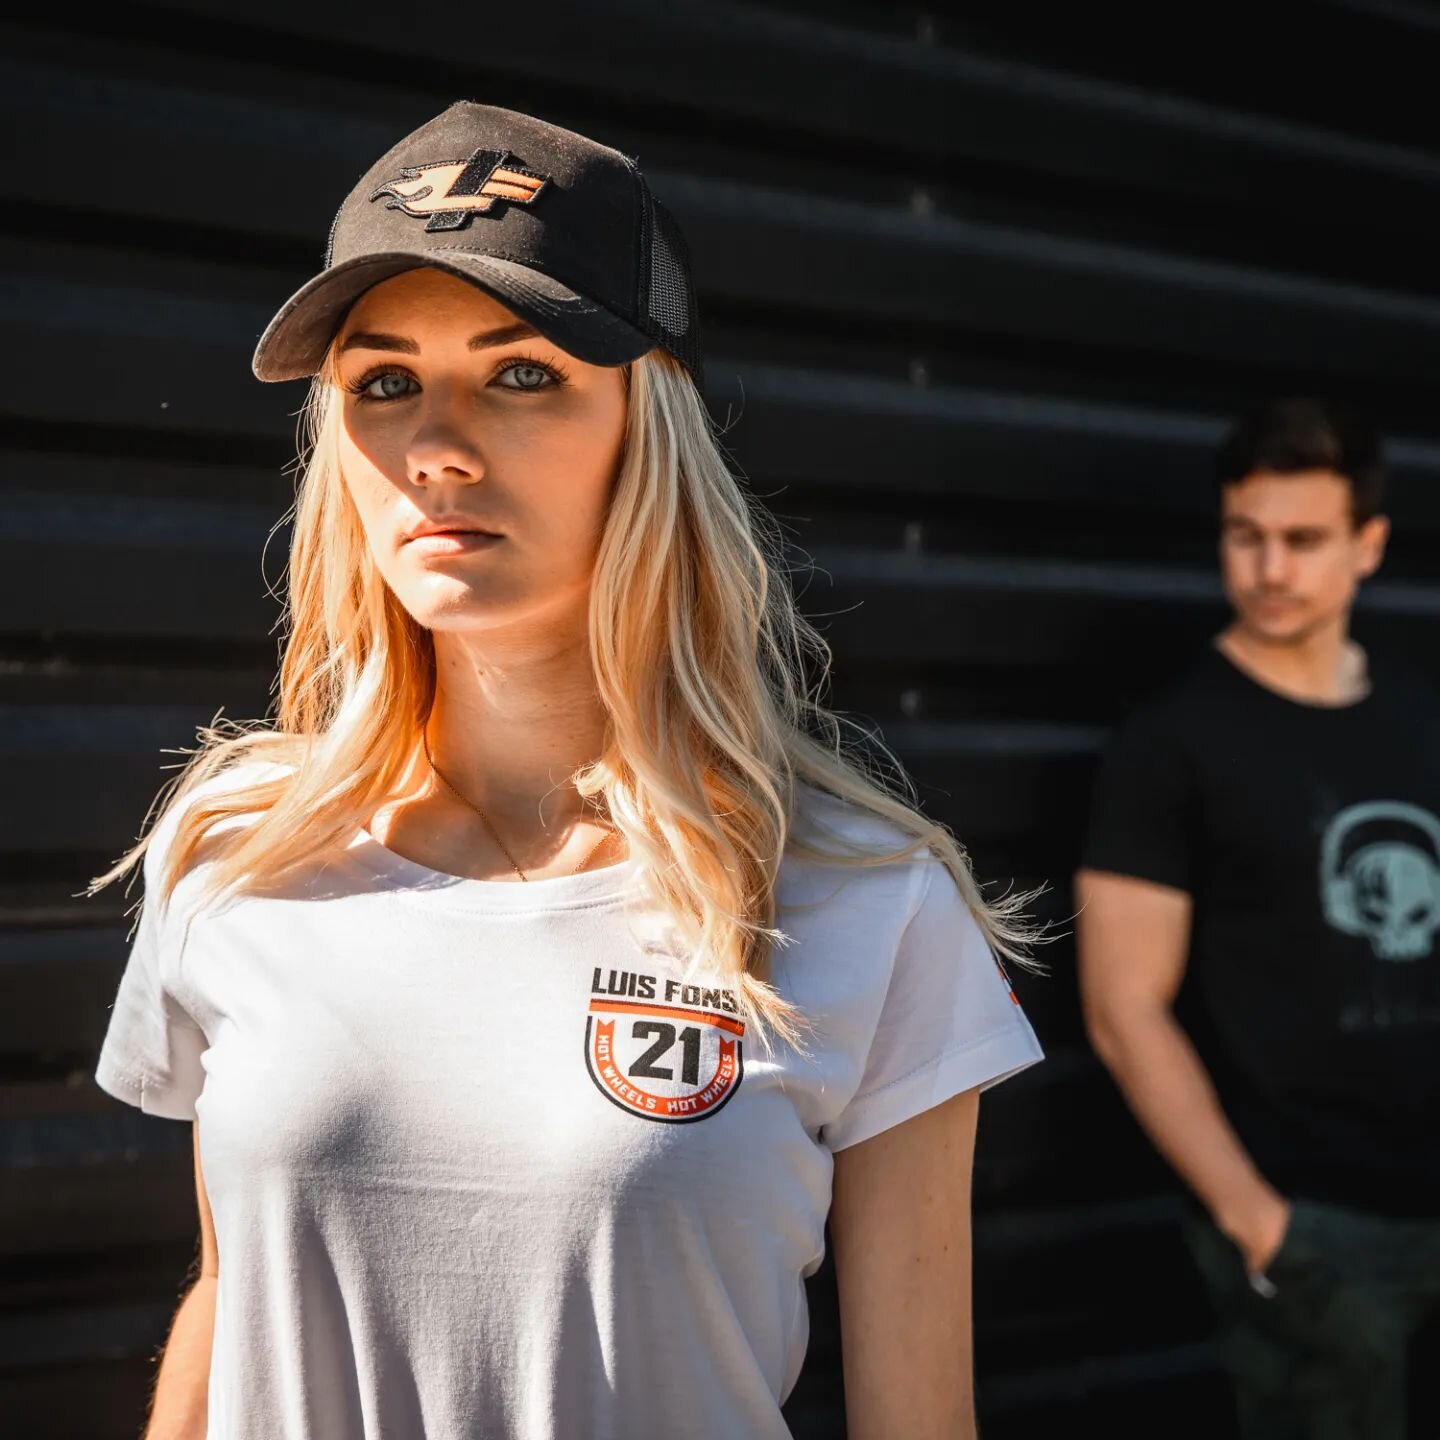 WOMEN'S COLLECTION

Find the tees from the women's collection on the online store.

👉 fonsicollection.com

📷 @indiana_anders
@romanedvle

#luisfonsi #hotwheels #custom #outfit #featured #fashion #fashionista #menstyle #menlook #menswear #stylish #o